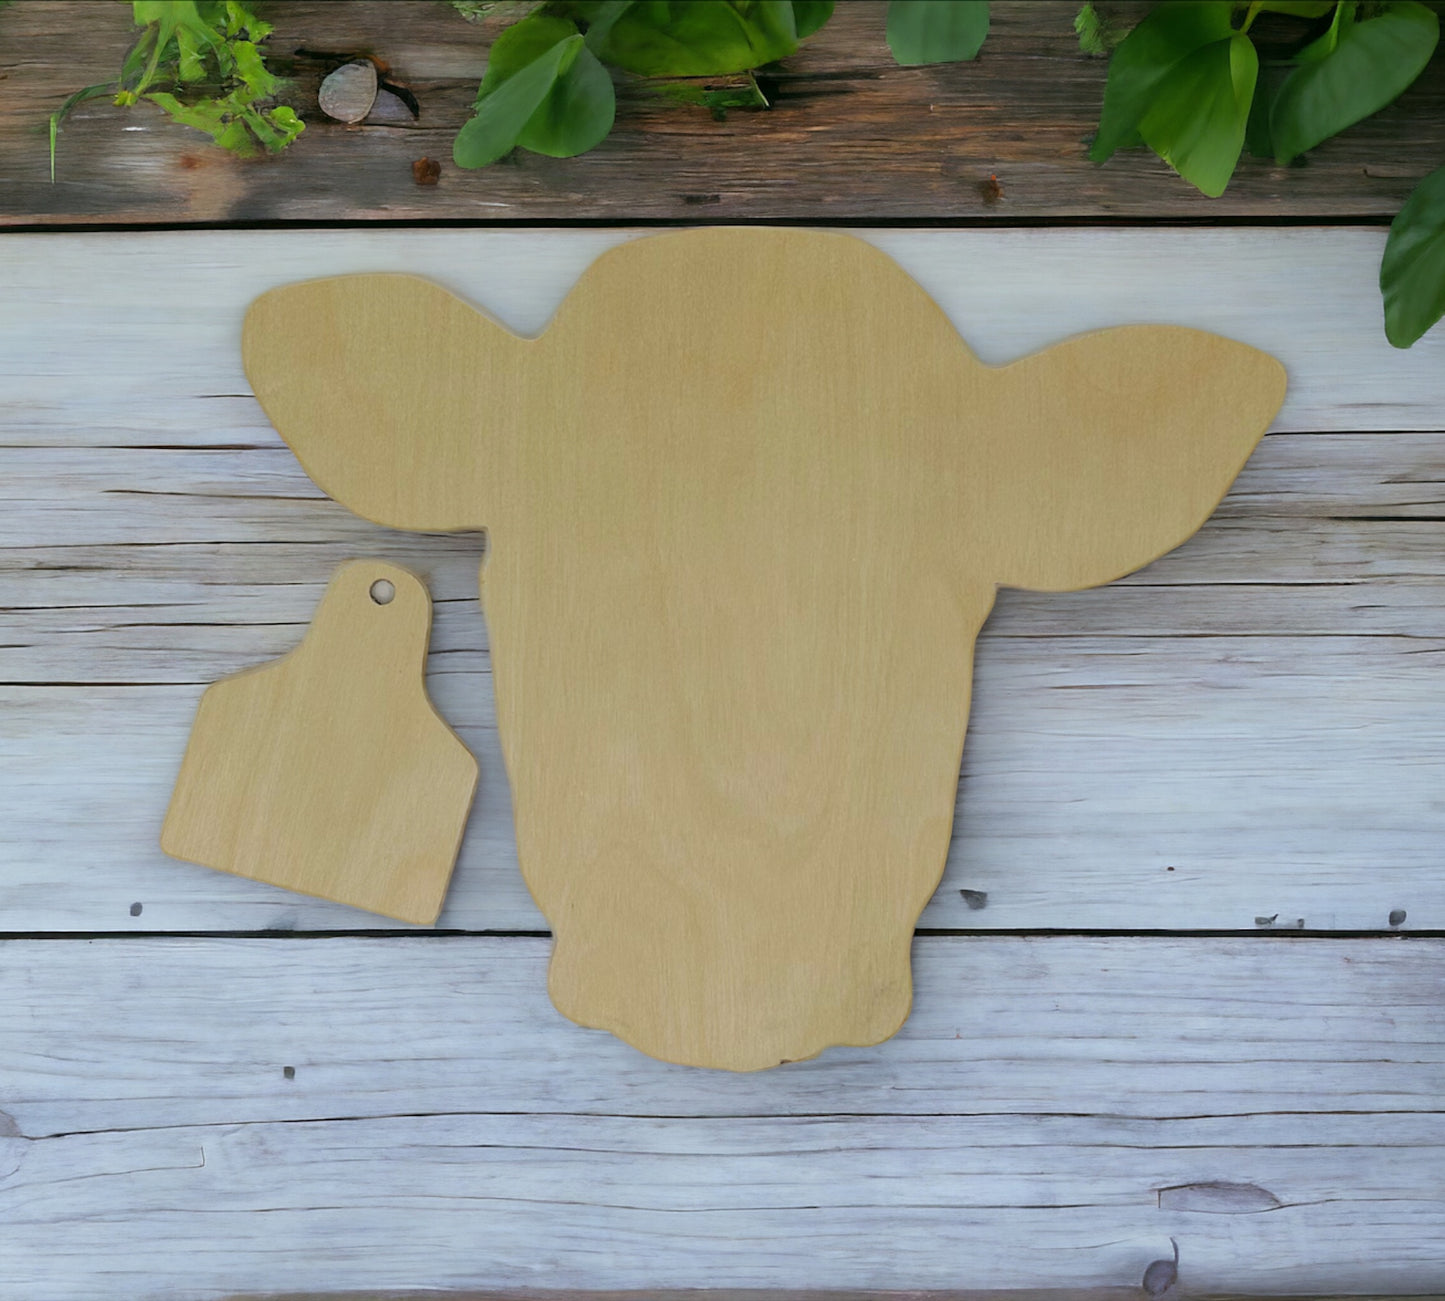 wooden cow head farming crafting supplies cutout for art and DIY projects.